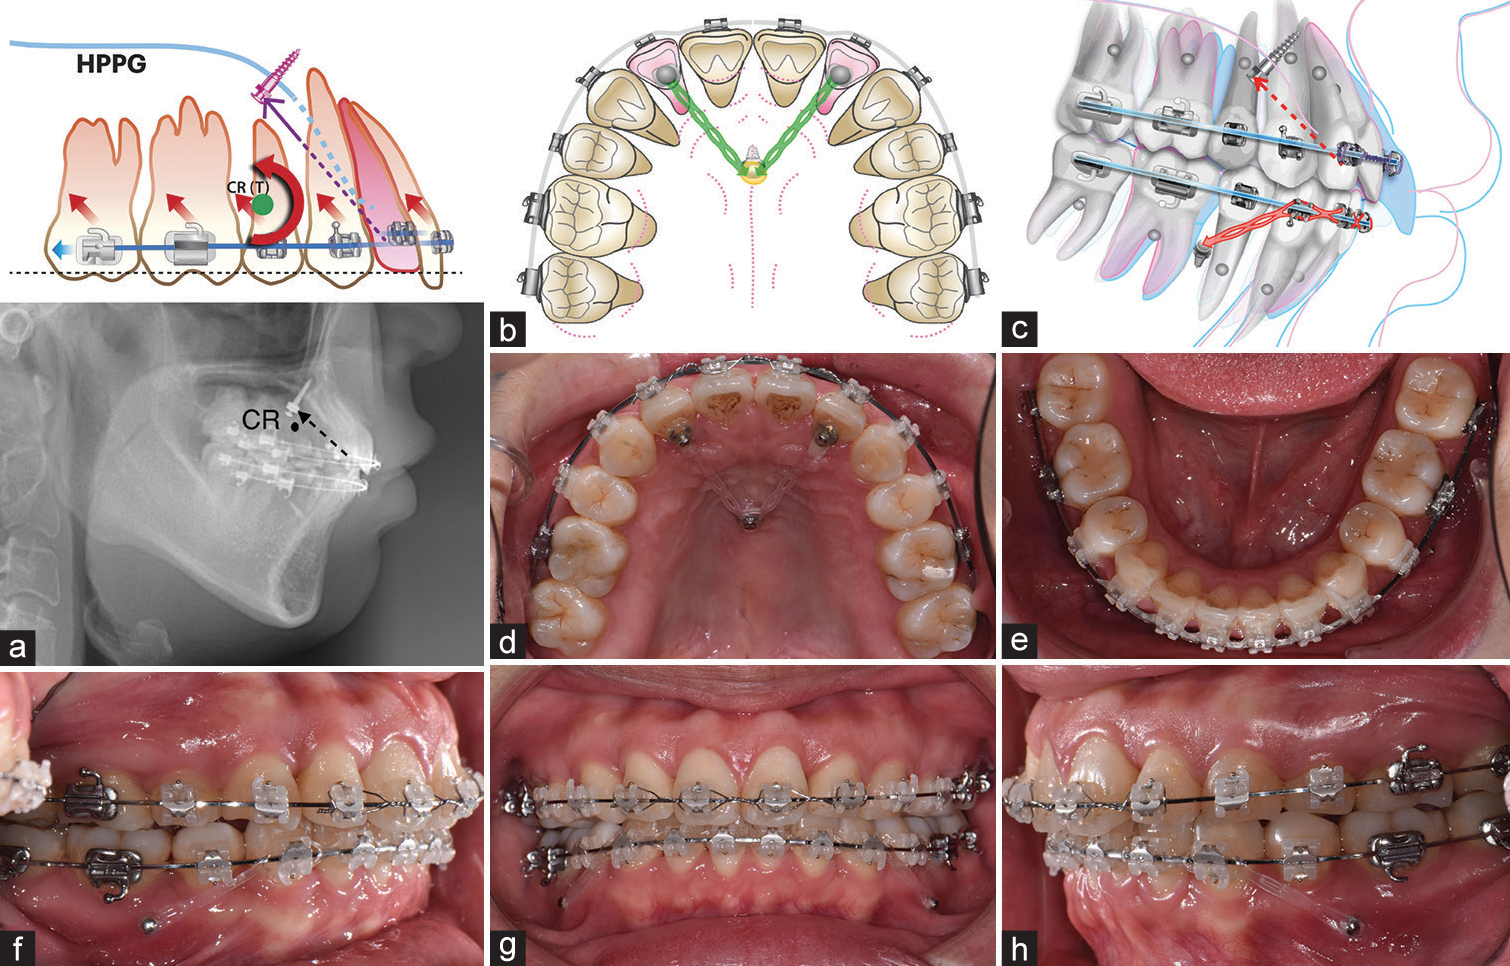 (a) The line of force lies in front of the center of resistance of upper dentition; therefore, total intrusion and counterclockwise rotation of the upper dentition could be achieved. (b and c) Mechanical design: Intrusive distalization of upper dentition by high-pull palatal gear technique. Intrusive distalization of lower dentition by bilateral apically-positioned mini-screws. (d-h) Intraoral photos at the 8th month of active treatment. CR (T): Center of resistance of the total dentition. Purple arrow: the line of force from lateral incisors to mid-palatal screw. Red arrows: the intrusive force applied on rigid stainless archwire, resulting the counterclockwise rotation of upper occlusal plane relative to the total center of resistance CR(T). Green eyelets: the force of elastic chain applied on lateral incisors. Yellow area: the protective resin on the palatal screw to reduce irritation. Red arrow: line of force application from the laterals to mid-palatal screw. Red eyelets: the intrusive force applied by the elastic chain attached on the apically-positioned mandibular miniscrews. HPPG: High-pull palatal gear.